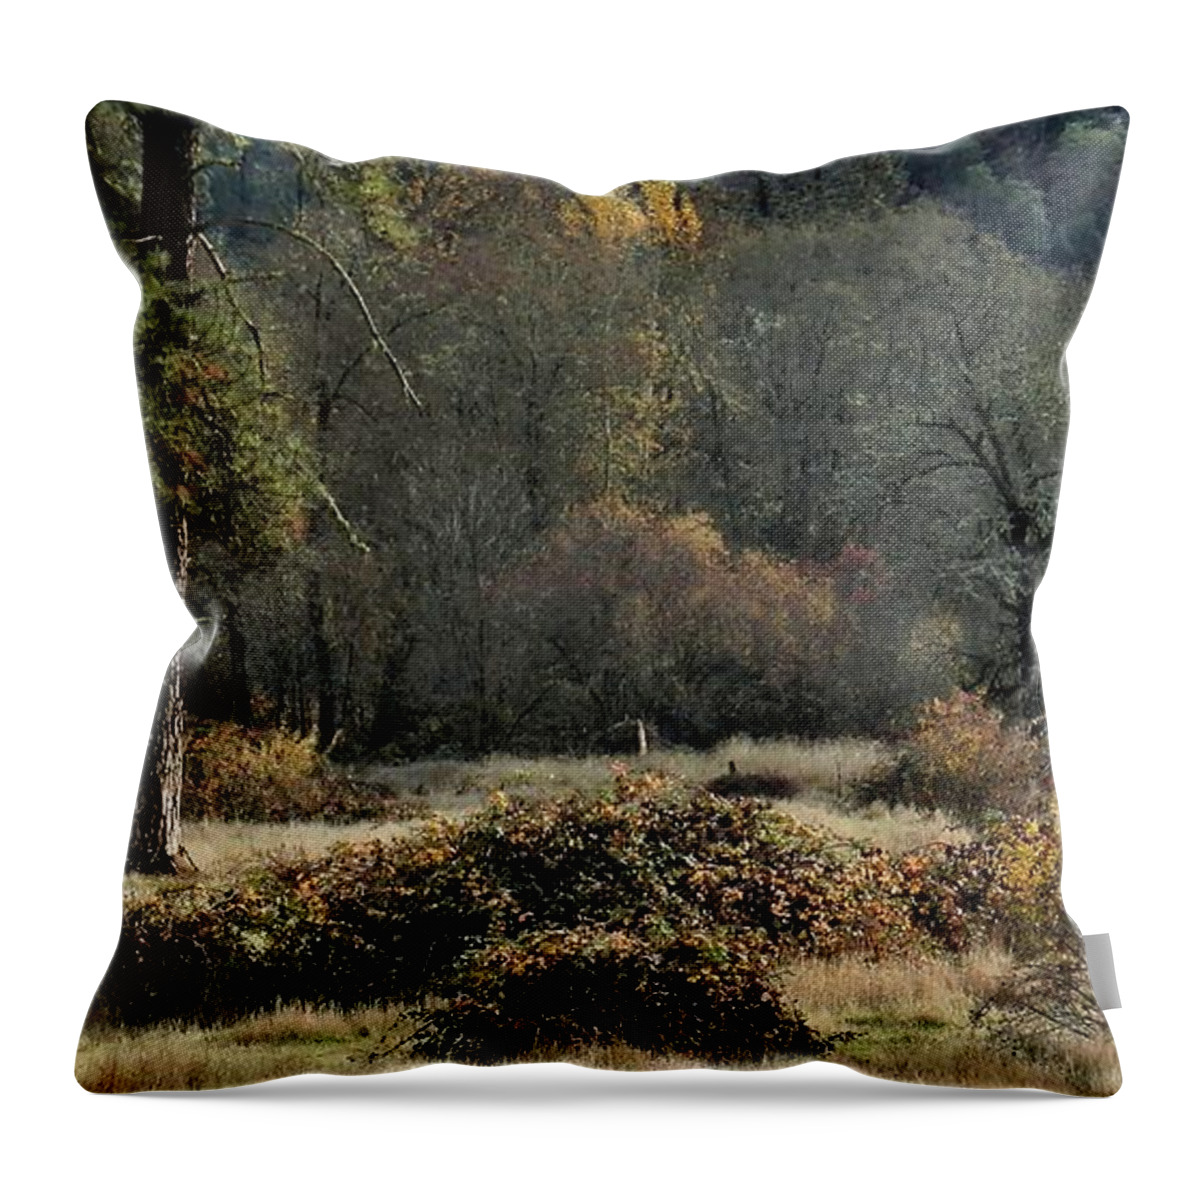 Landscape Throw Pillow featuring the photograph Thankful by Julia Hassett